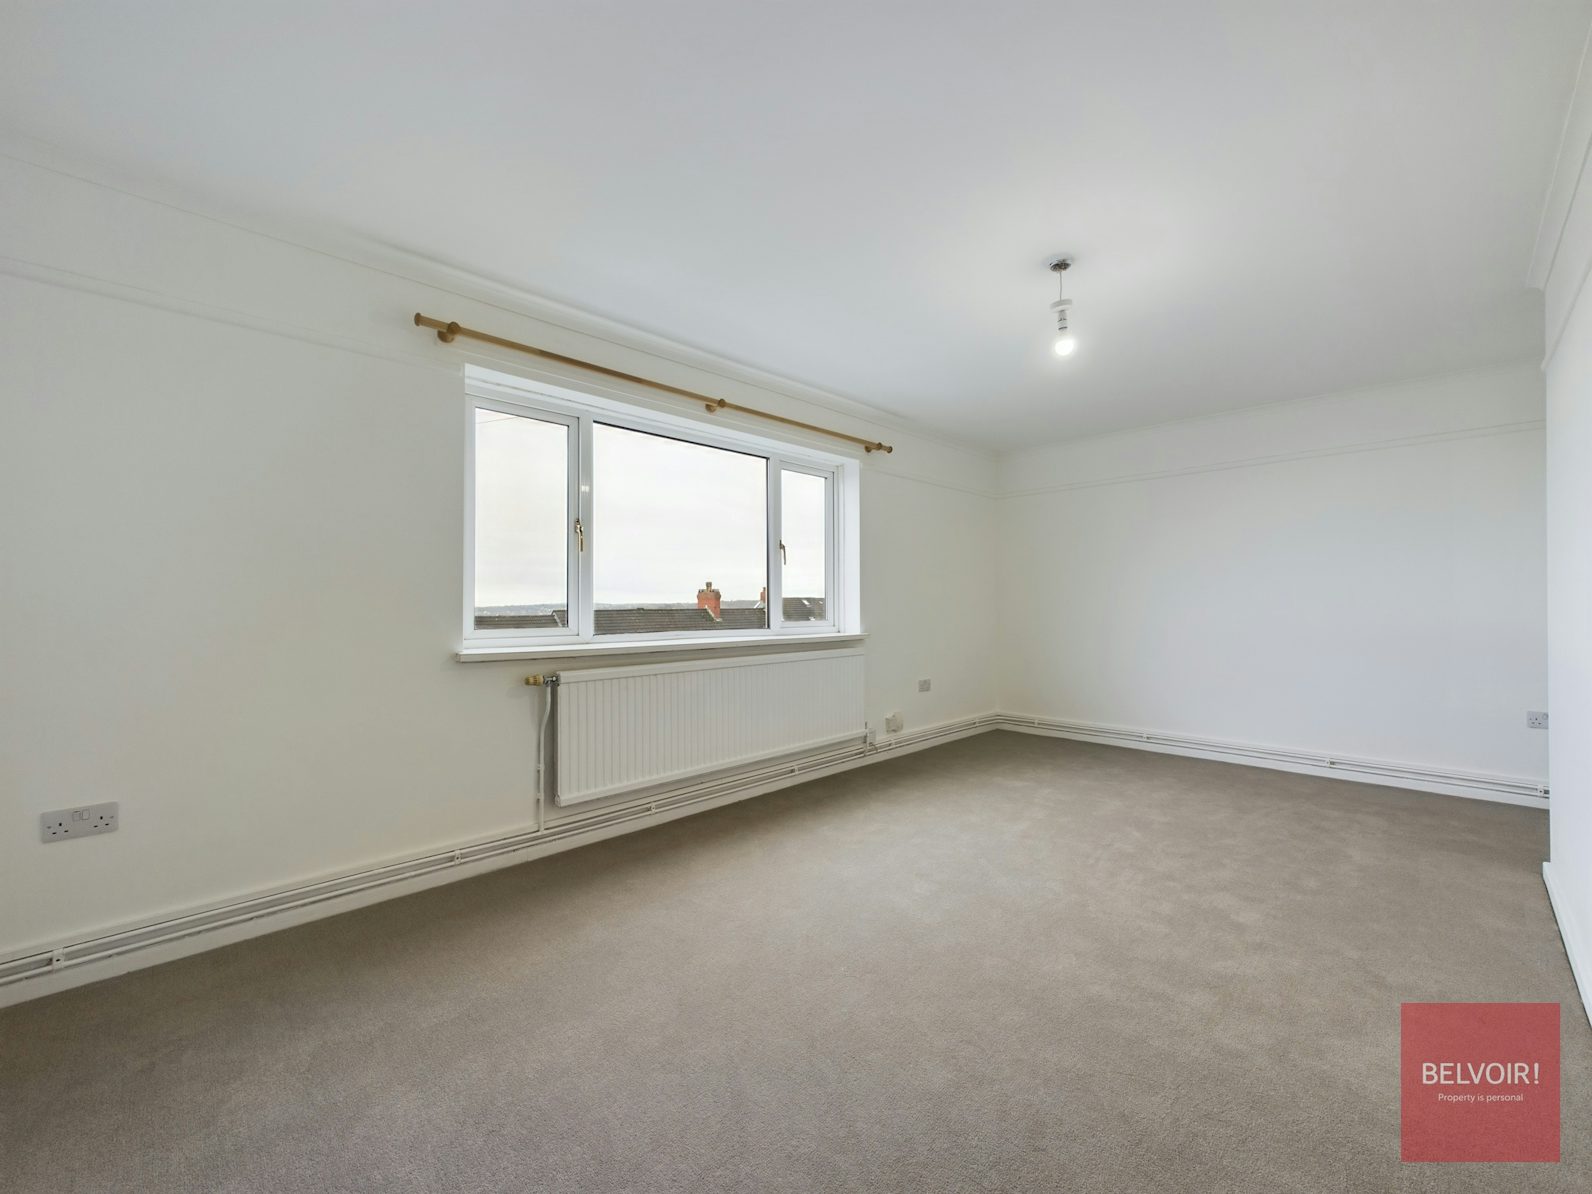 Flat to rent on Penlan Crescent Uplands, Swansea, SA2